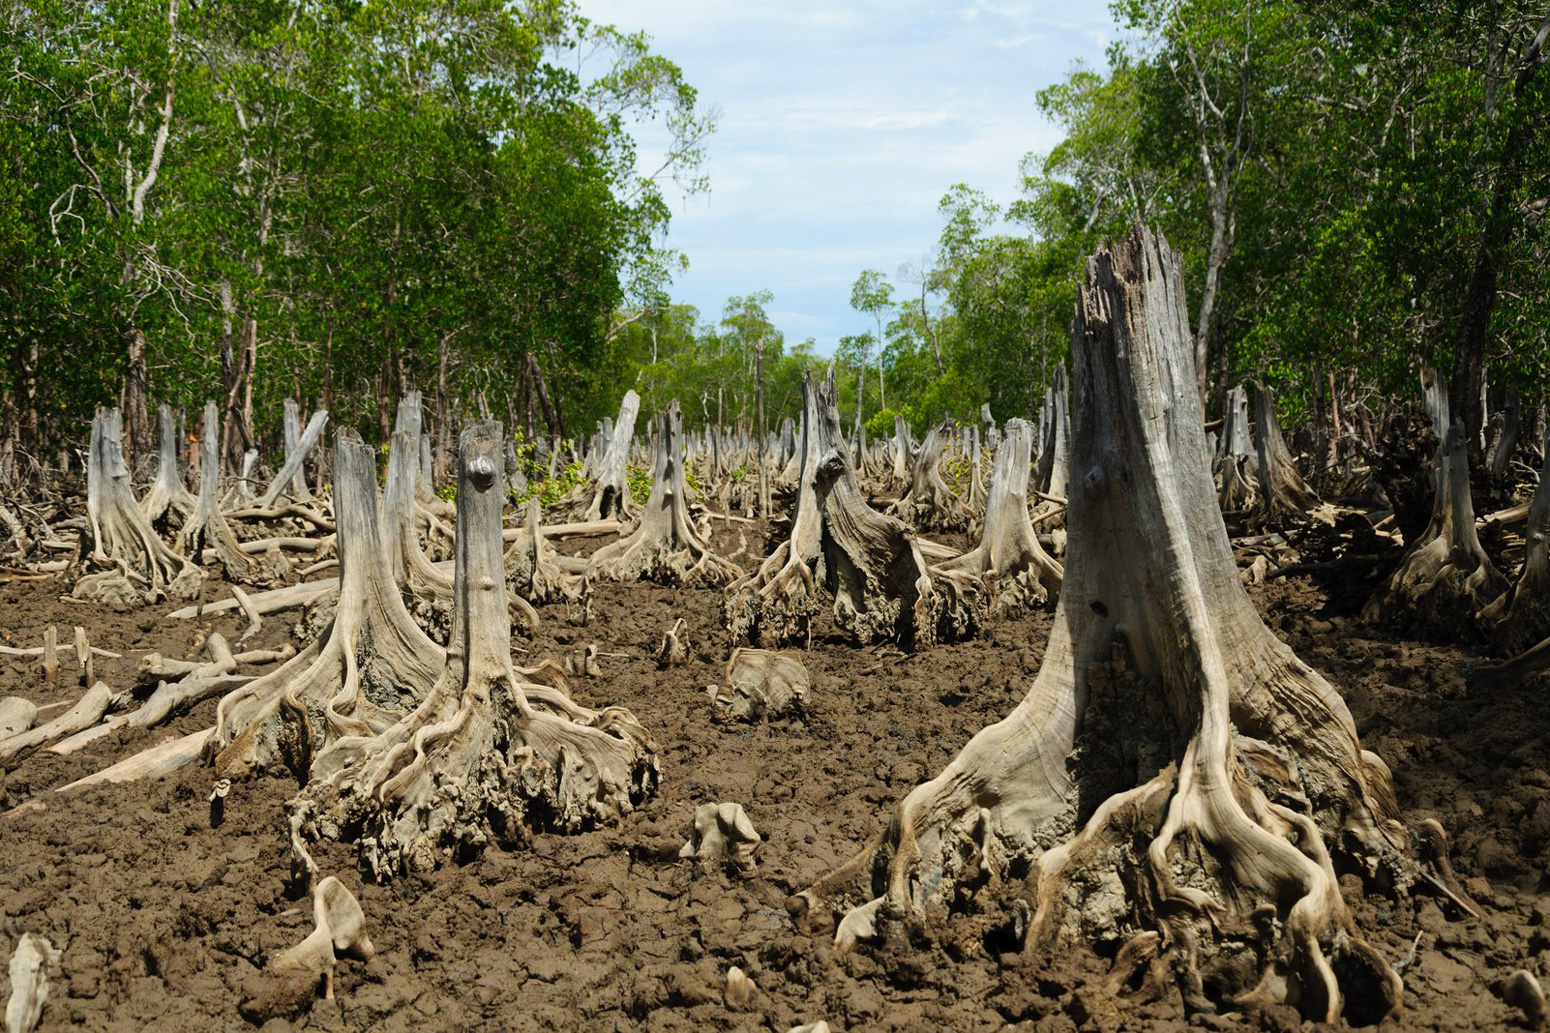 Deforested area in a mangrove forest